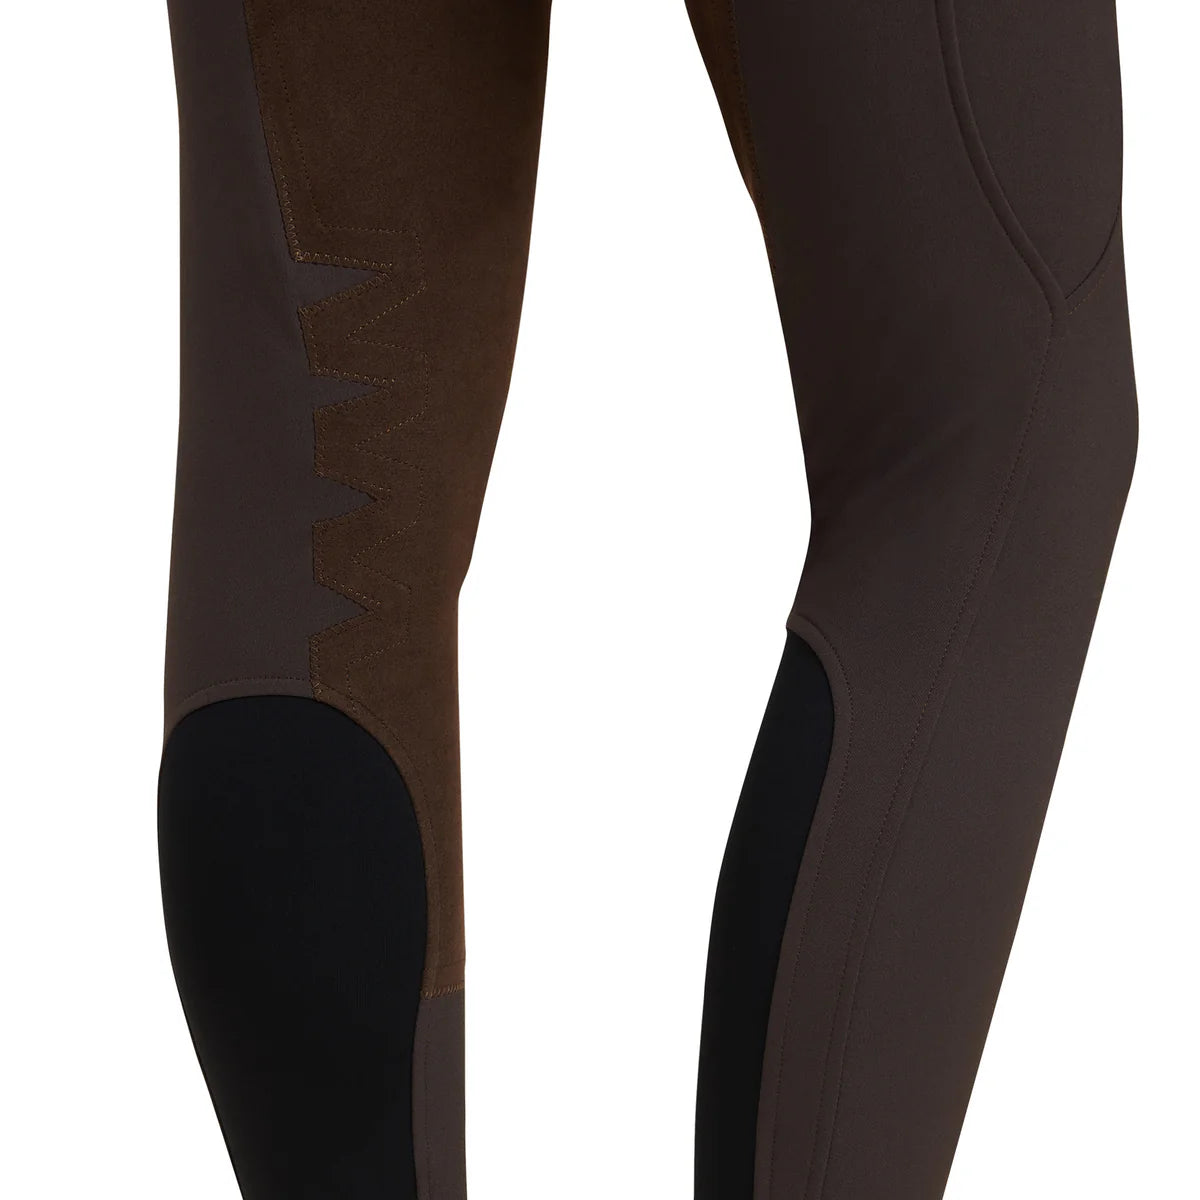 Ariat Prelude Tradition Full Seat Women's Breeches